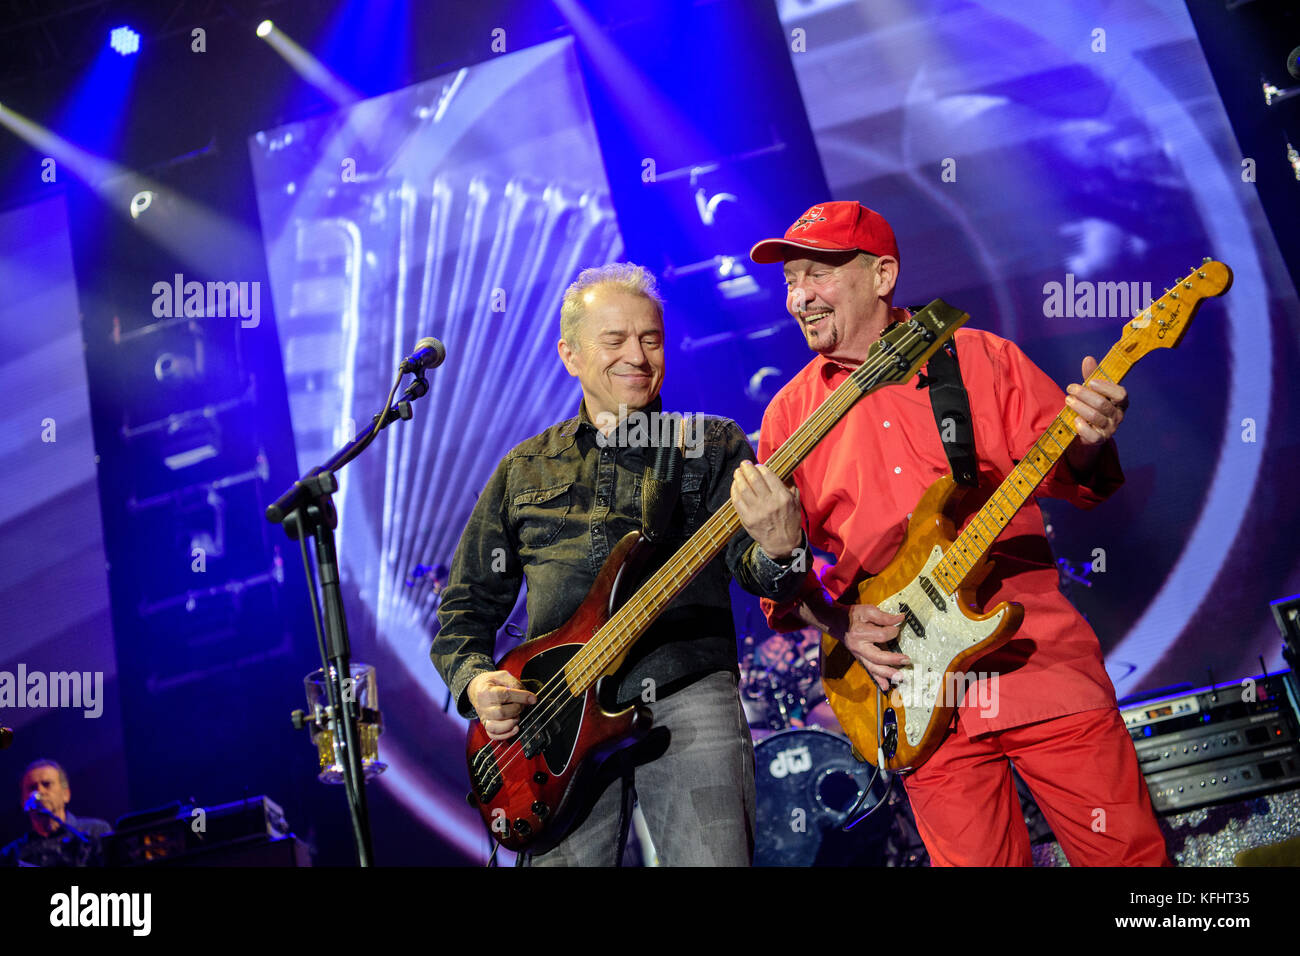 Singer and bass player Guenther Sigl (L) and guitar player Barny Murphy perform in the course of the anniversary concert of the Spider Murphy Gang in the Olympiahalle in Munich, Germany, 29 October 2017. The Spider Murphy Gang celebrates its 40th stage anniversary with the concert. Photo: Matthias Balk/dpa Stock Photo